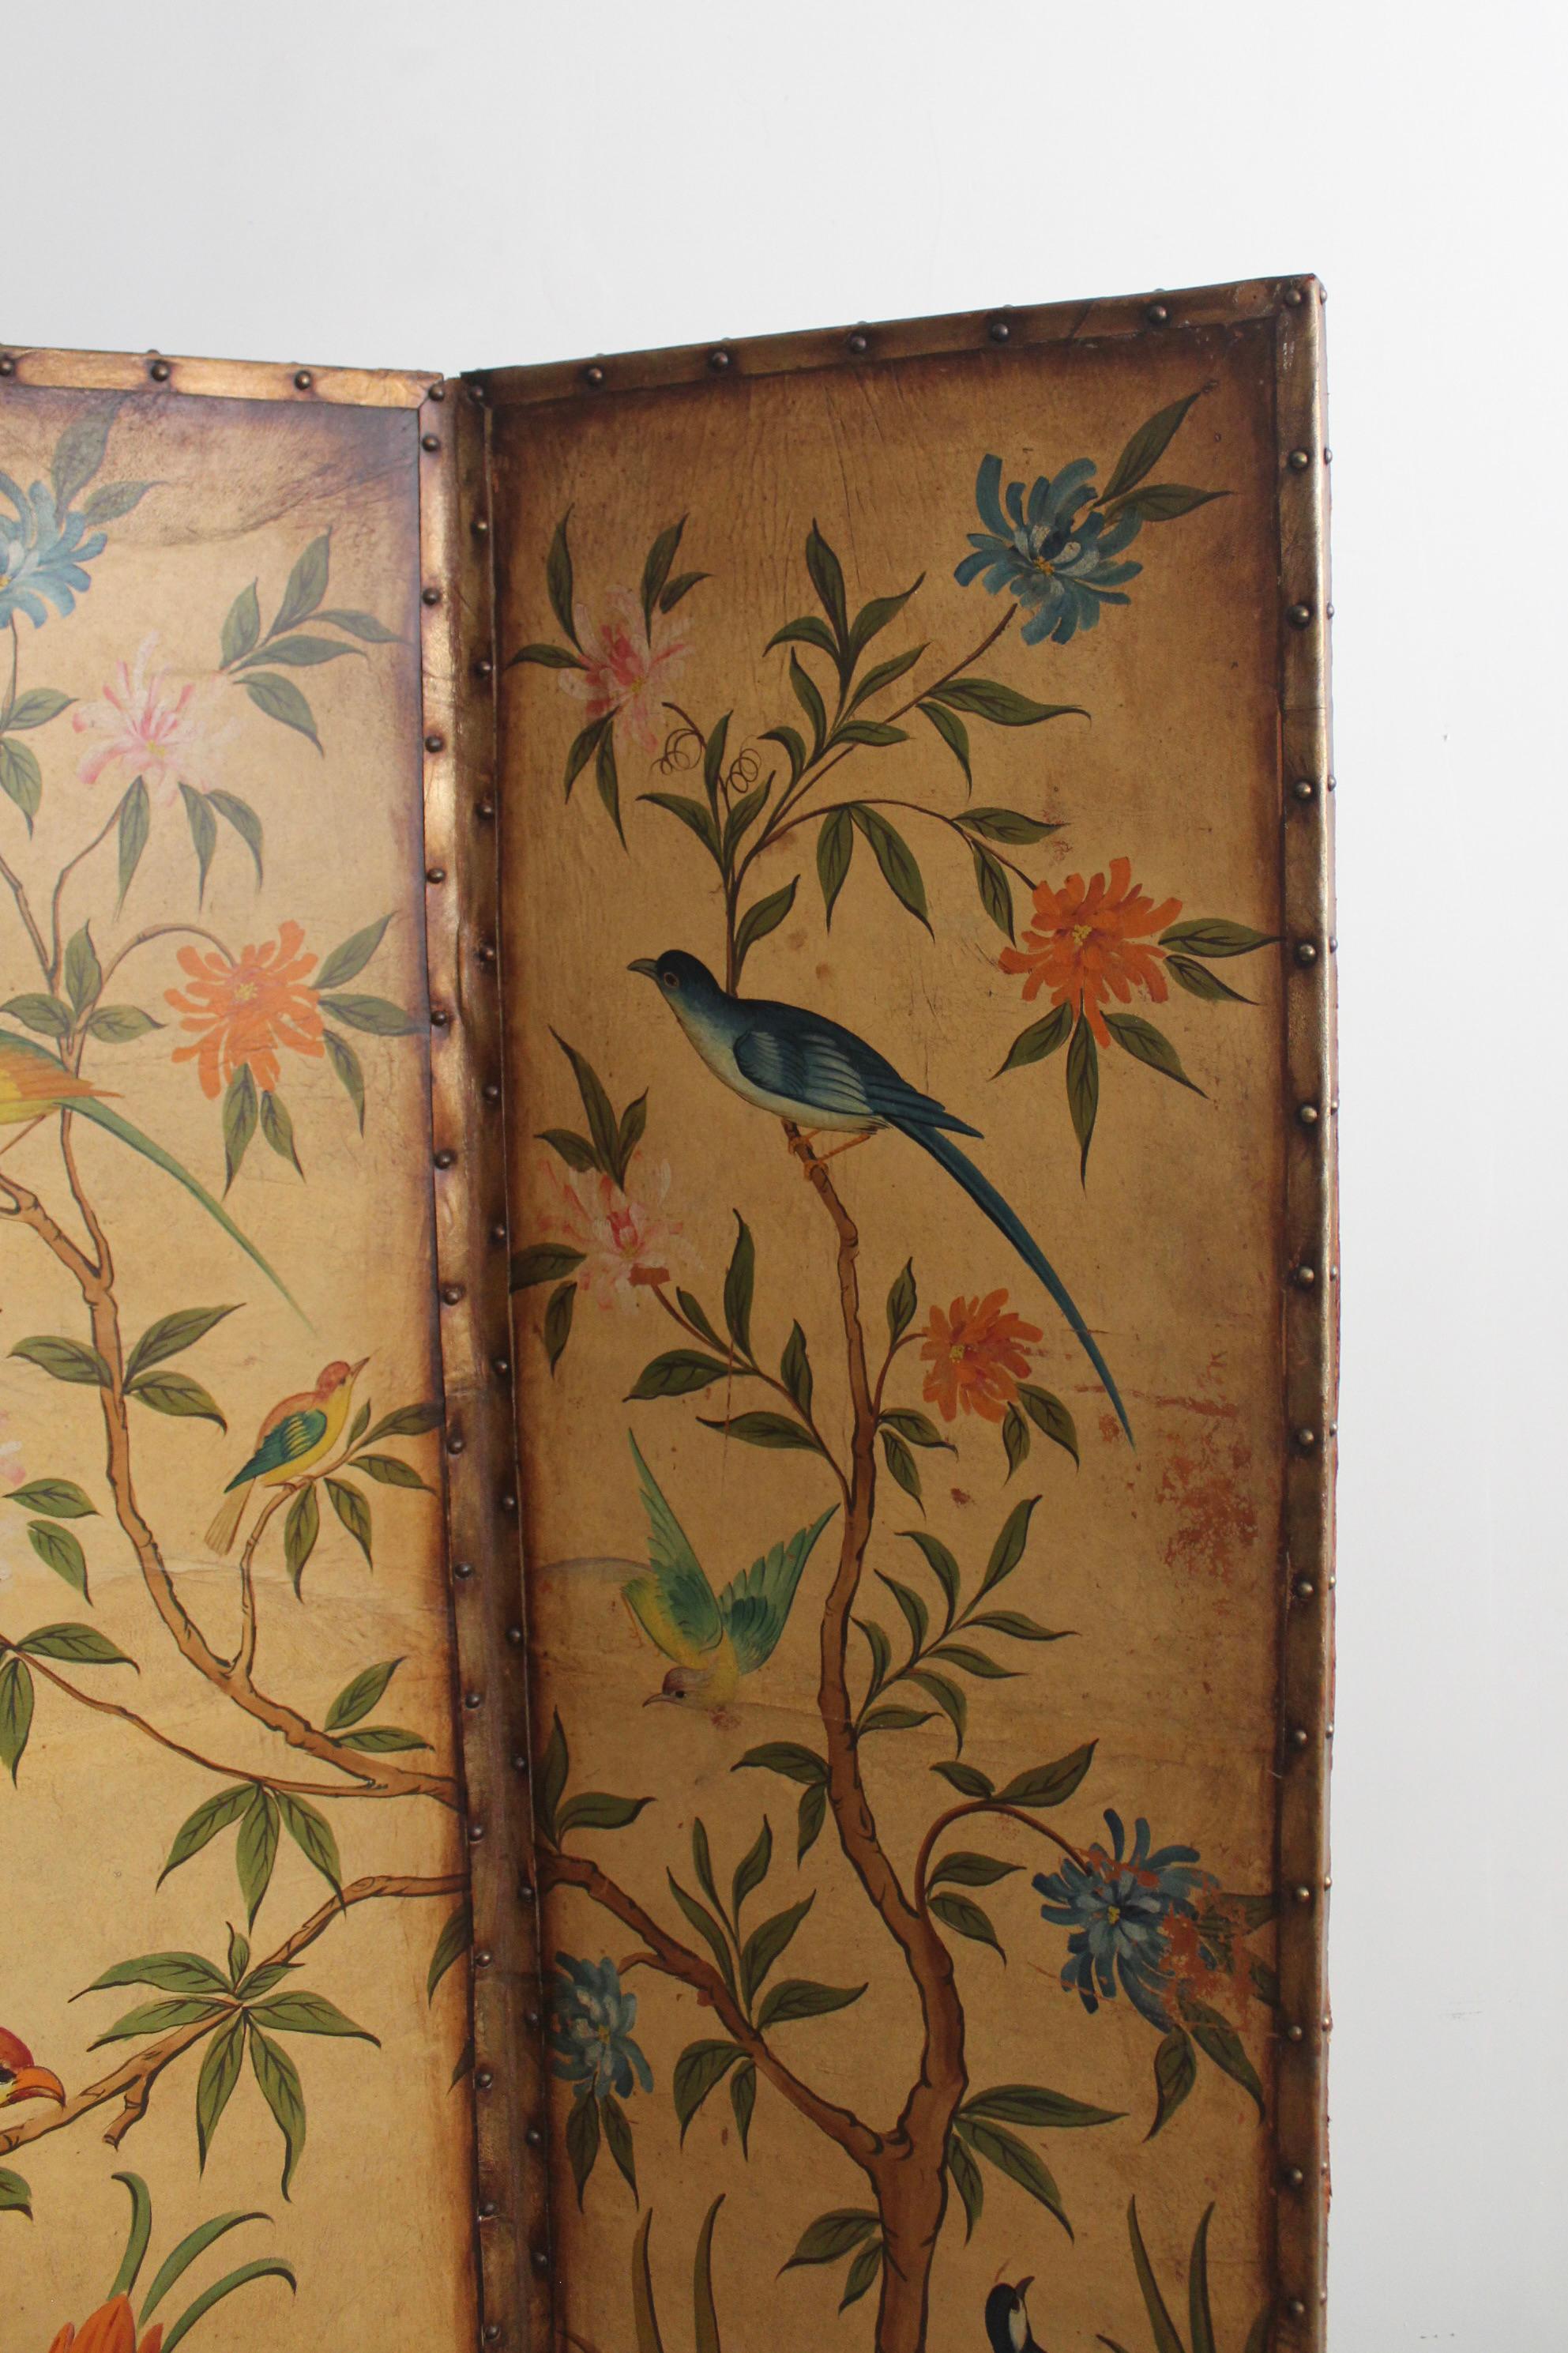 Hand Painted Leather Screen, 1890s. Victorian 4 fold leather and wood panels, gilded studded border details and hand painted birds and blossoms. 

Dimensions: Individual panel: 72.5